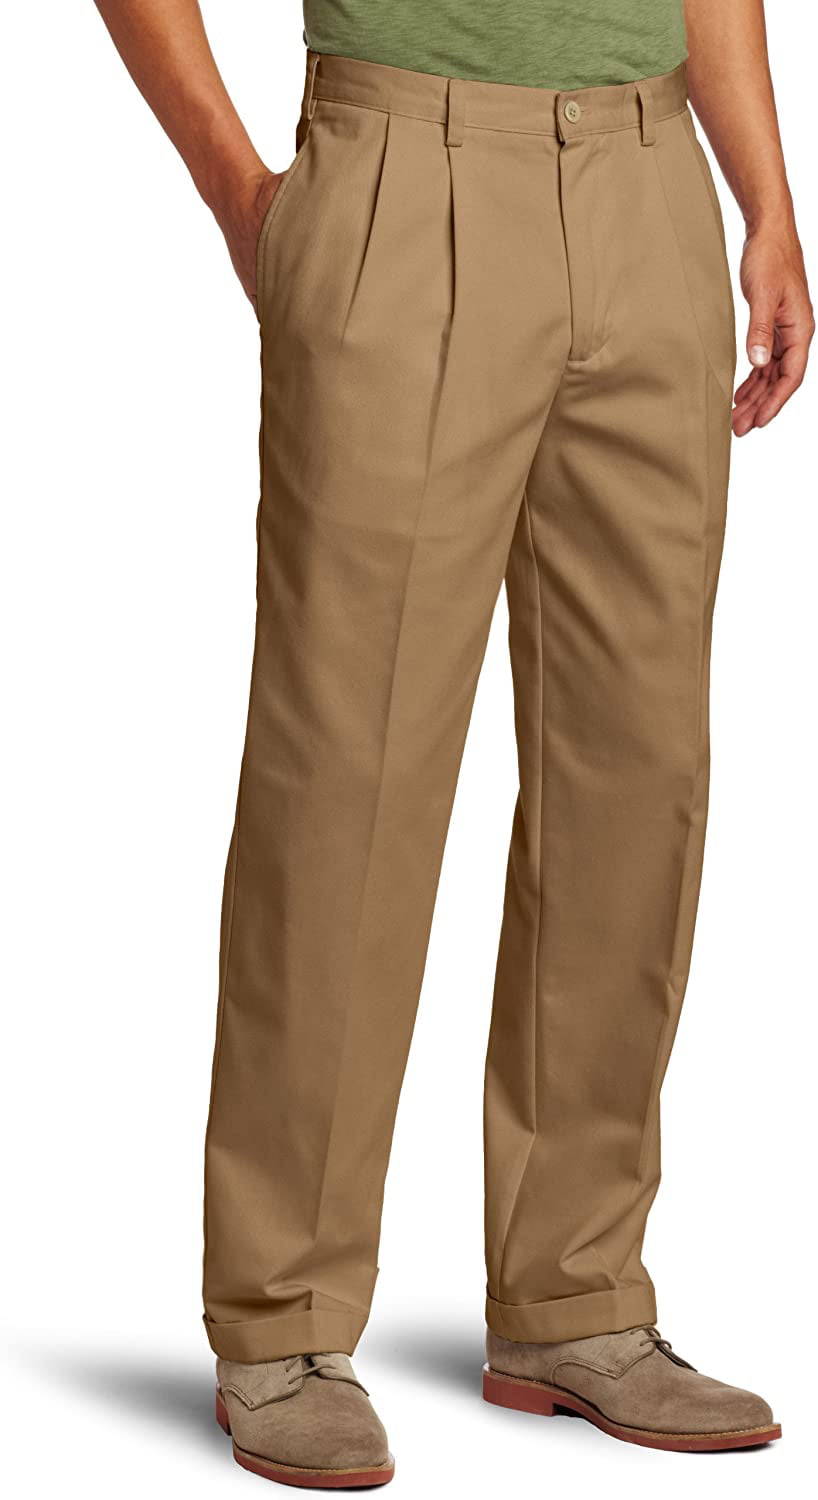 Download IZOD - Mens Pants 38x32 Cuffed Pleated American Chinos ...